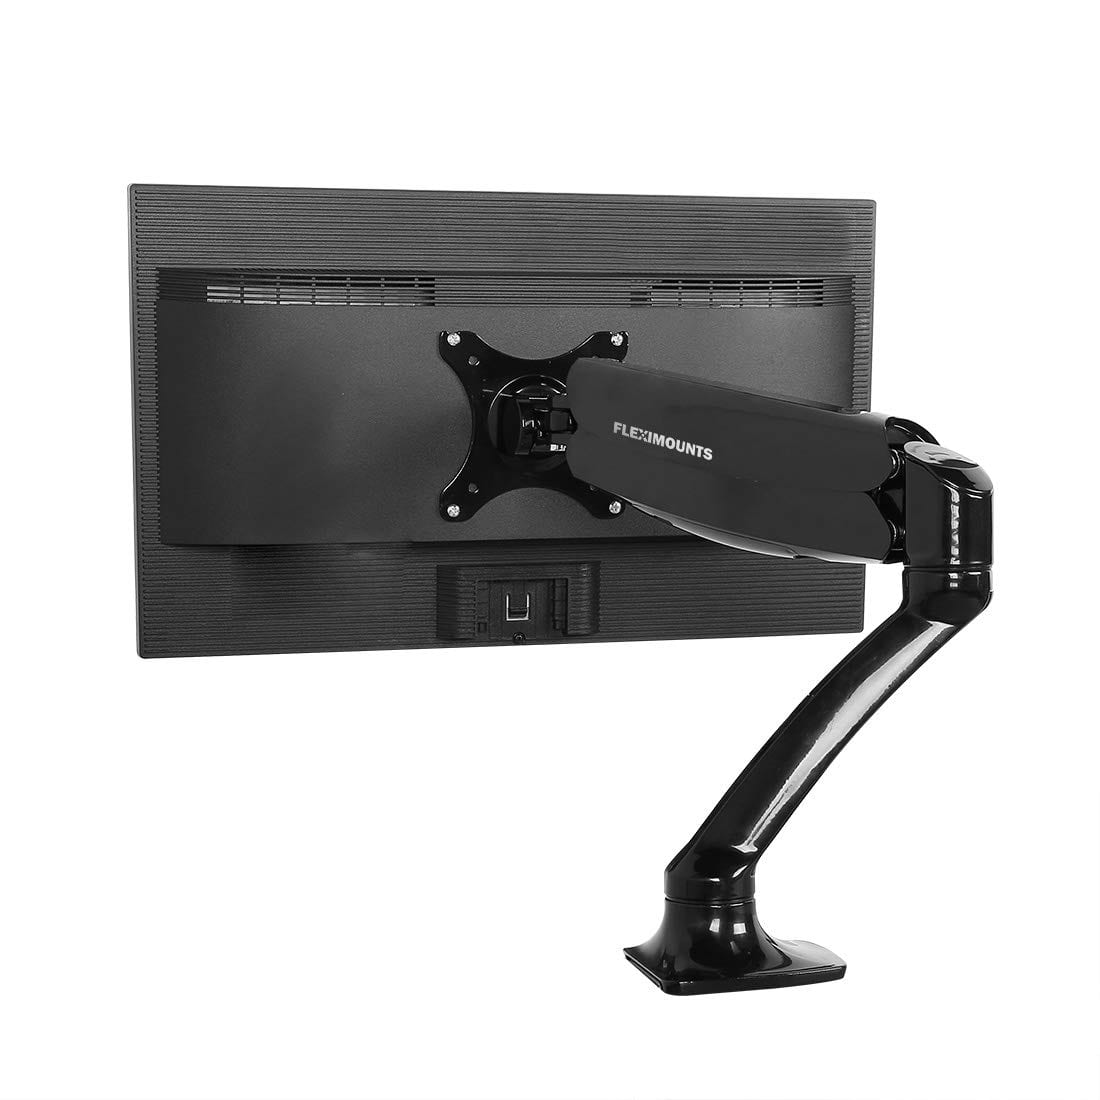 Fleximounts TV monitor arm instructions at home